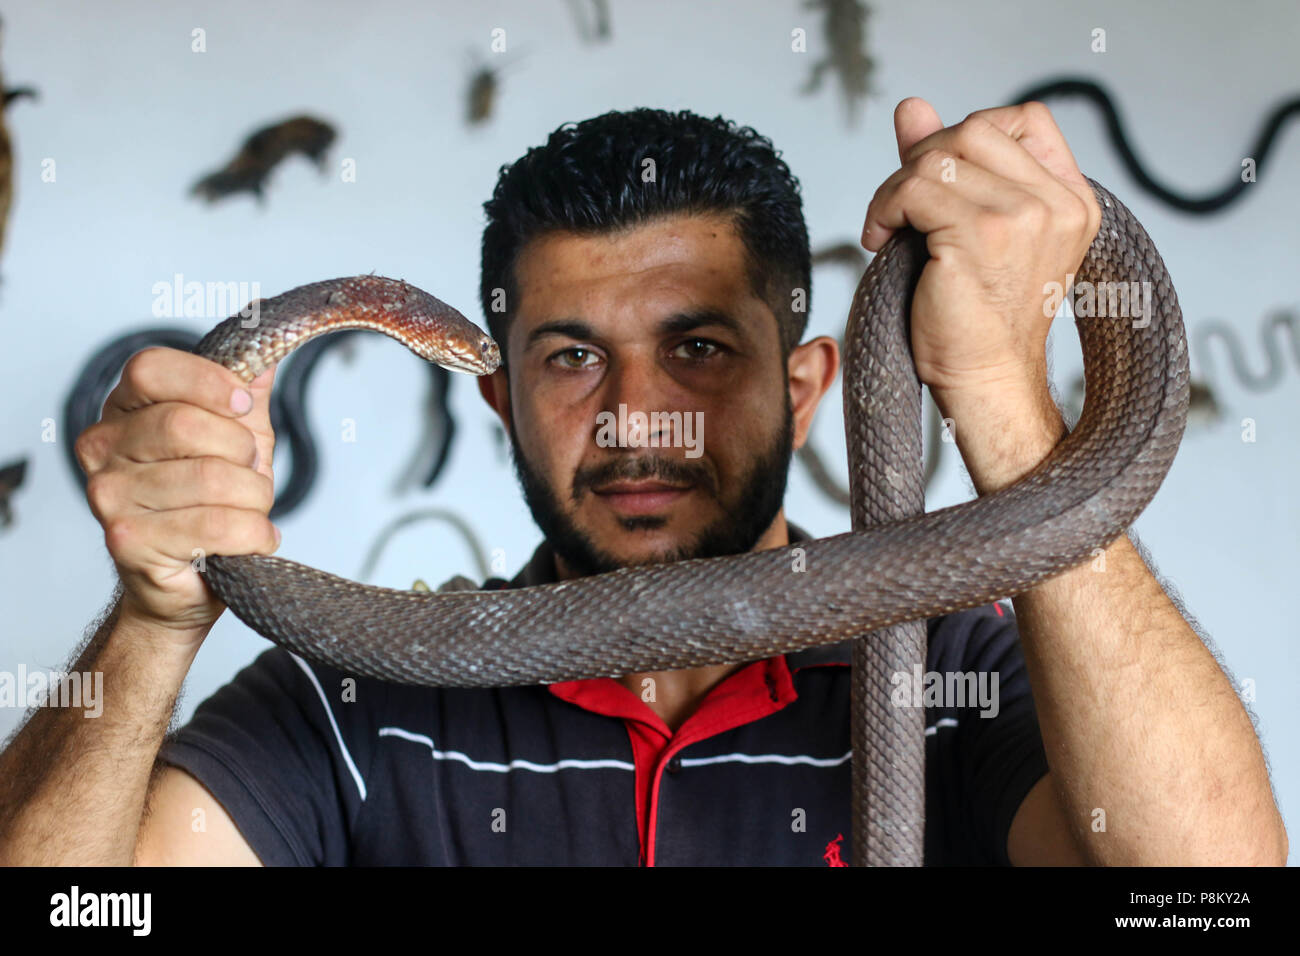 Gaza City, Gaza. 12th July, 2018. Palestinian Abdel Fattah holds the snake in his hand.July 12, 2018 - The Gaza Strip, Palestine - Palestinian Abdel Fattah Issa Asalieh 32 years working on raising snakes in his home for 10 years east of Tel Zaatar north of the Gaza Strip and Abdel Fattah owns more than 15 species of snakes different in Palestine.Abdel Fattah Issa Asalieh, a 32 year old Palestinian has been working on raising snakes in his home for 10 years and he owns more than 15 species of different snakes in east of Tel Zaatar north of the Gaza Strip, Palestine. (Credit Image: © Ahmad Hasa Stock Photo